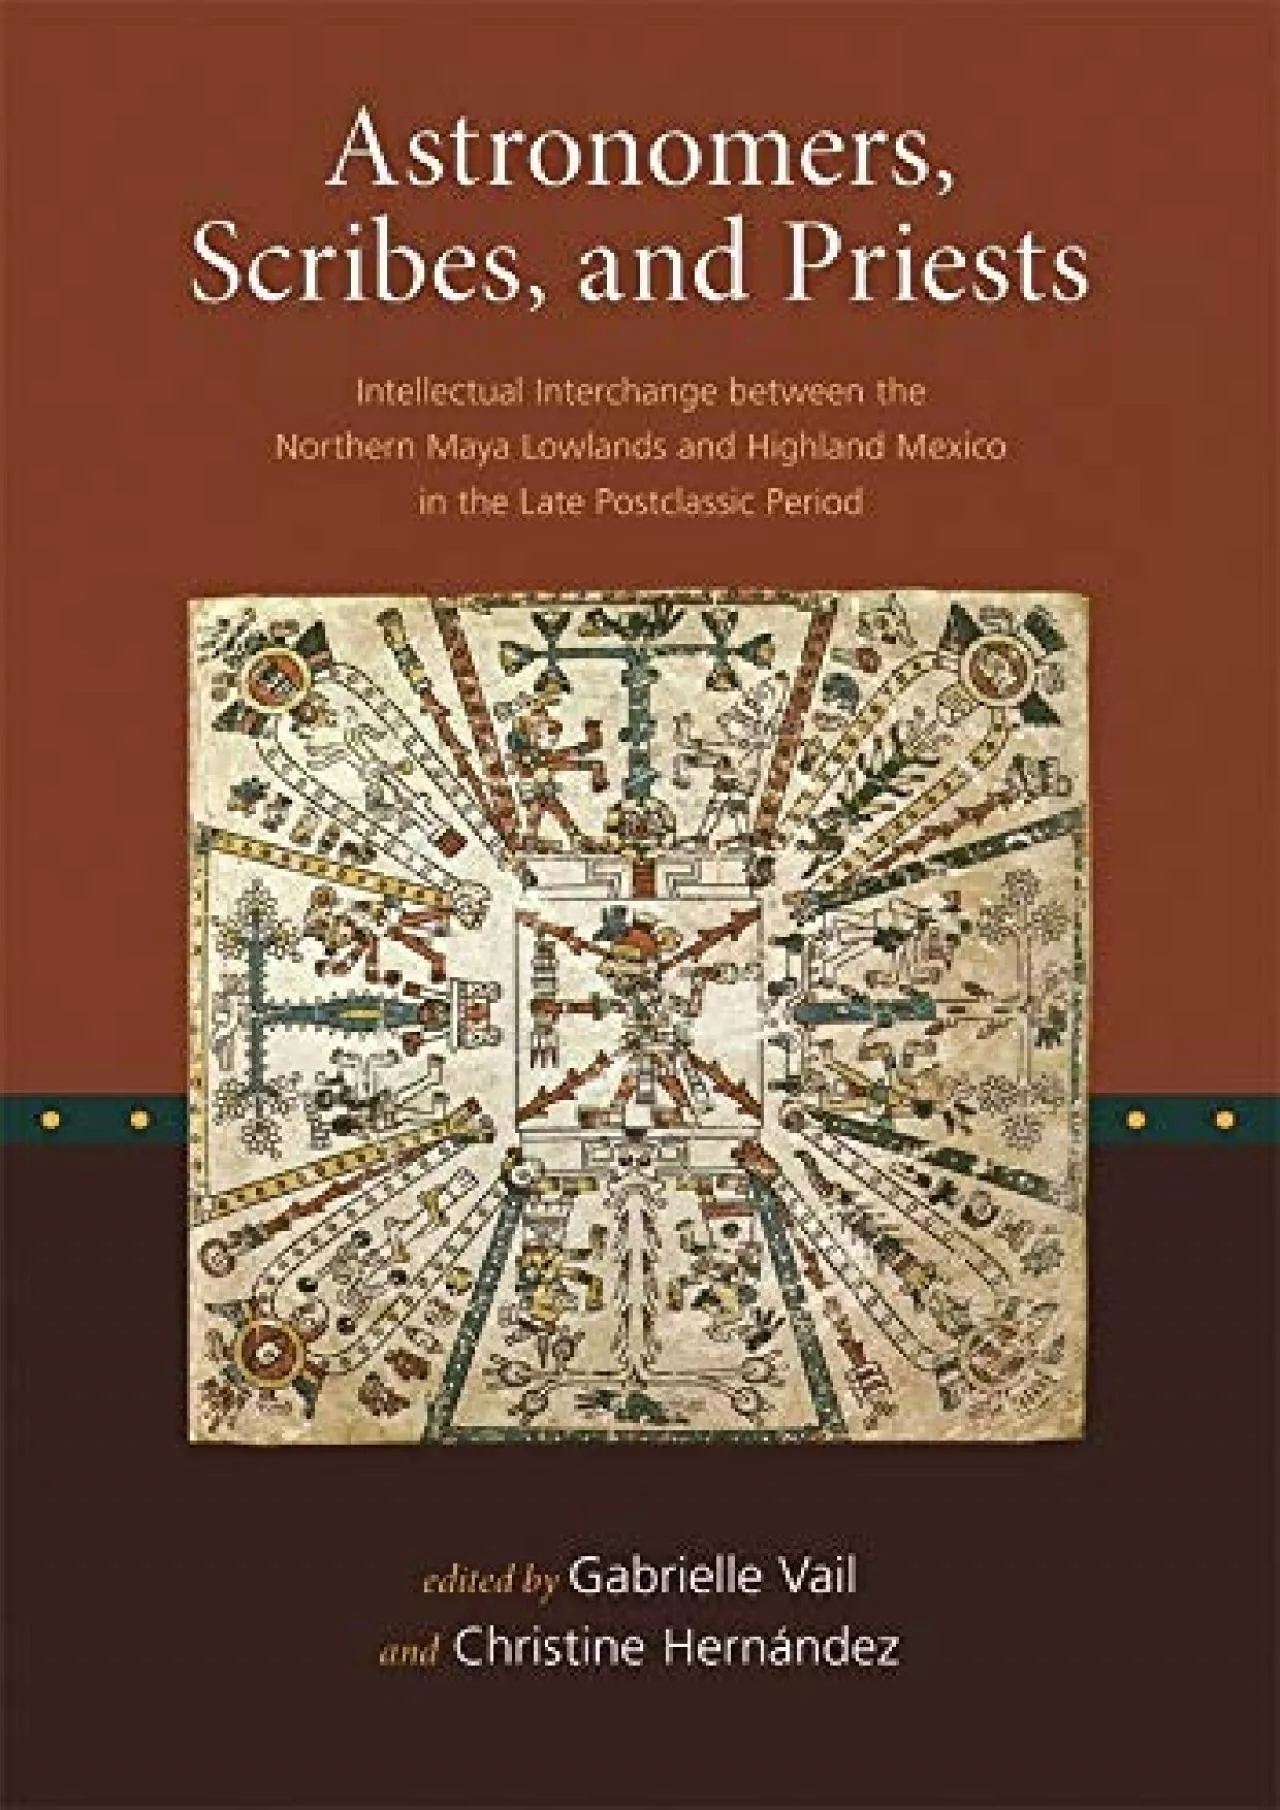 (DOWNLOAD)-Astronomers, Scribes, and Priests: Intellectual Interchange between the Northern